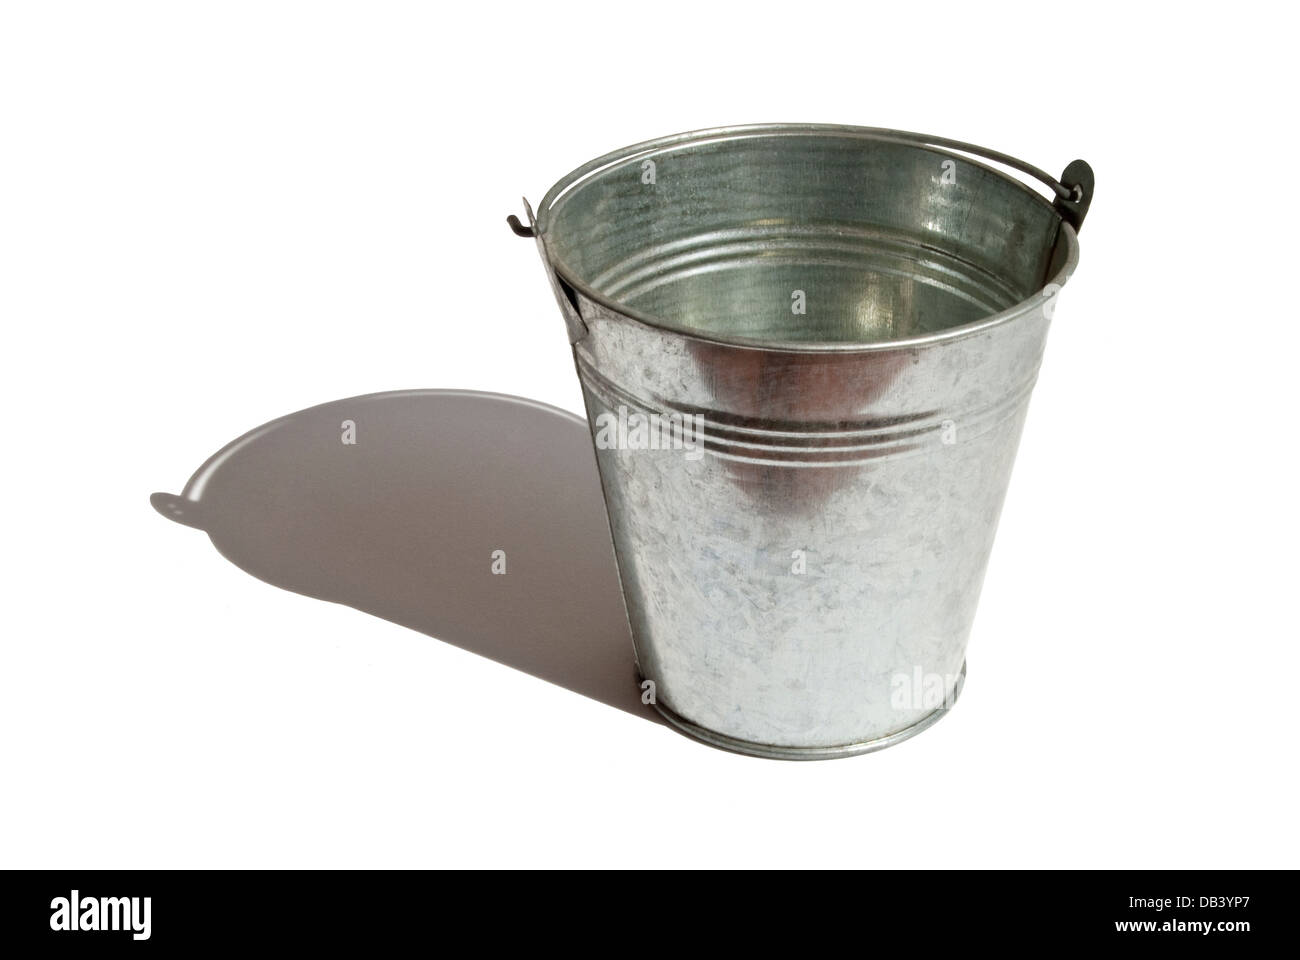 Metal bucket for carrying or storage Stock Photo